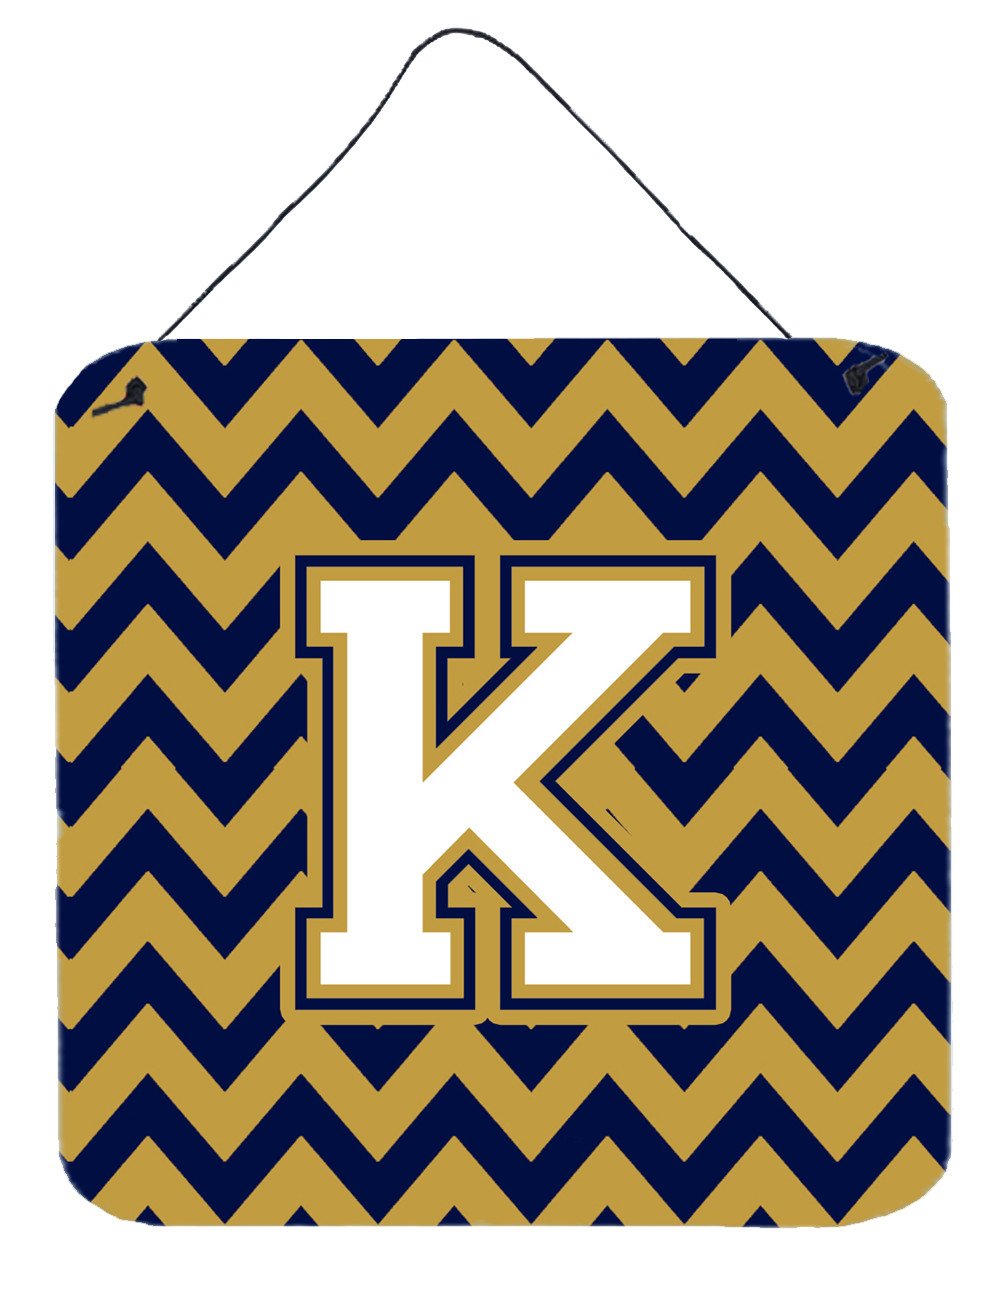 Letter K Chevron Navy Blue and Gold Wall or Door Hanging Prints CJ1057-KDS66 by Caroline's Treasures